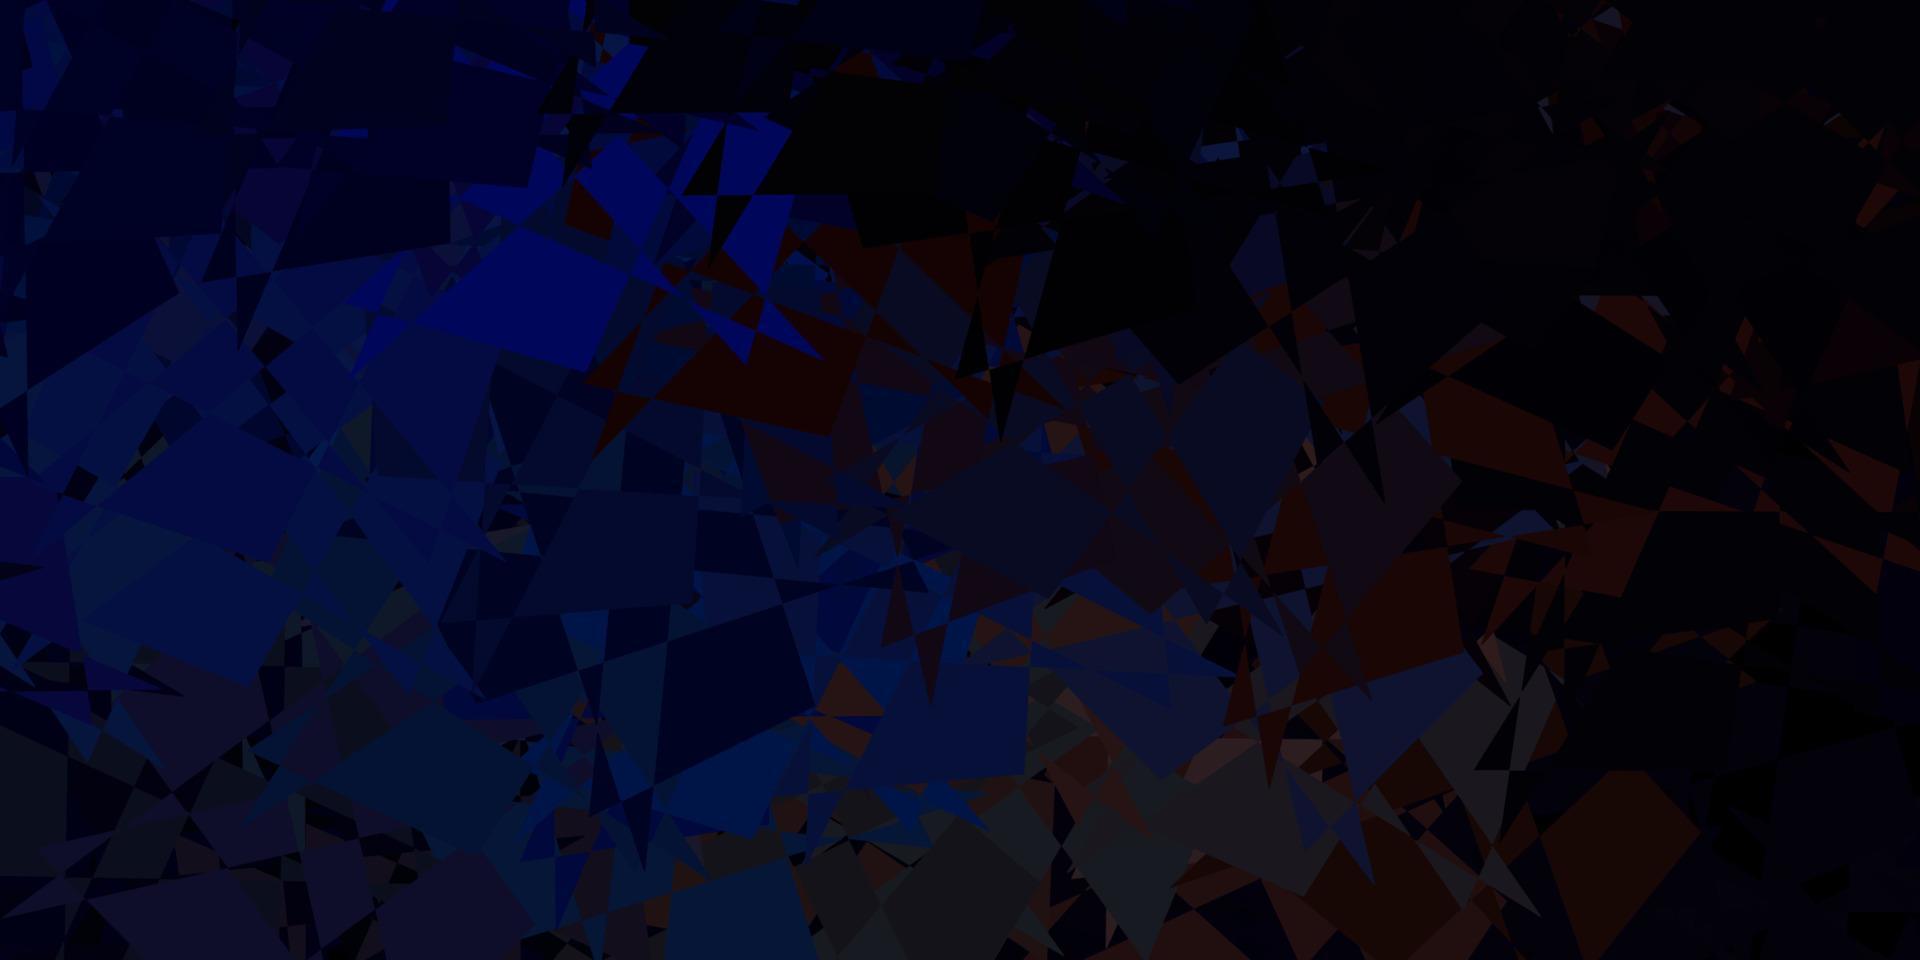 Dark blue, yellow vector pattern with abstract shapes.